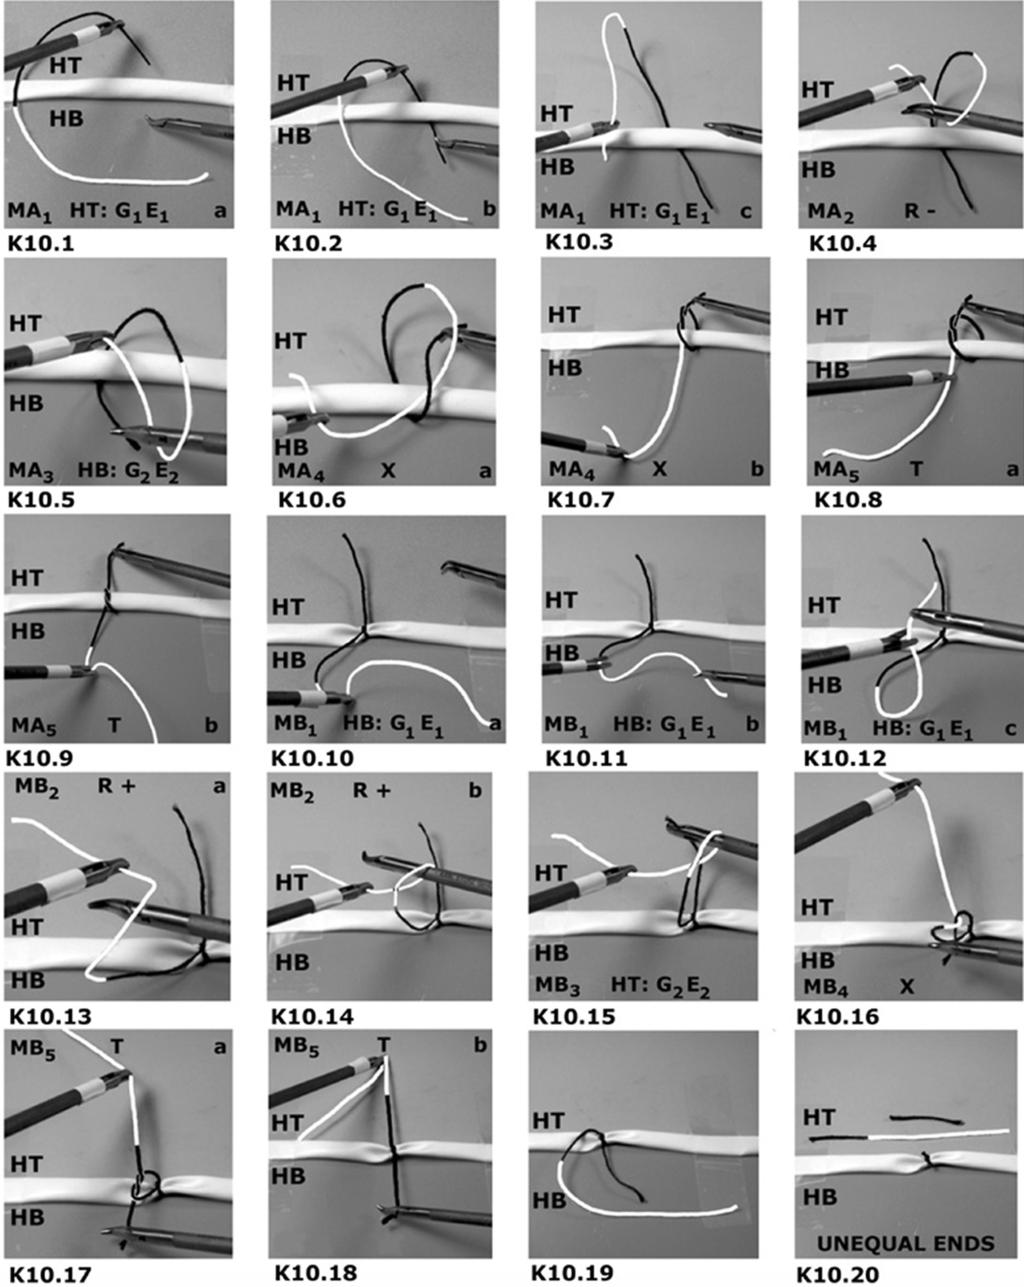 These formed the bases for the open surgery squareknot tying analysis performed in this study. 1 CONCLUSION Figure 7. Laparoscopic intracorporeal square knot 10 (unequal lengths unequal rotations).